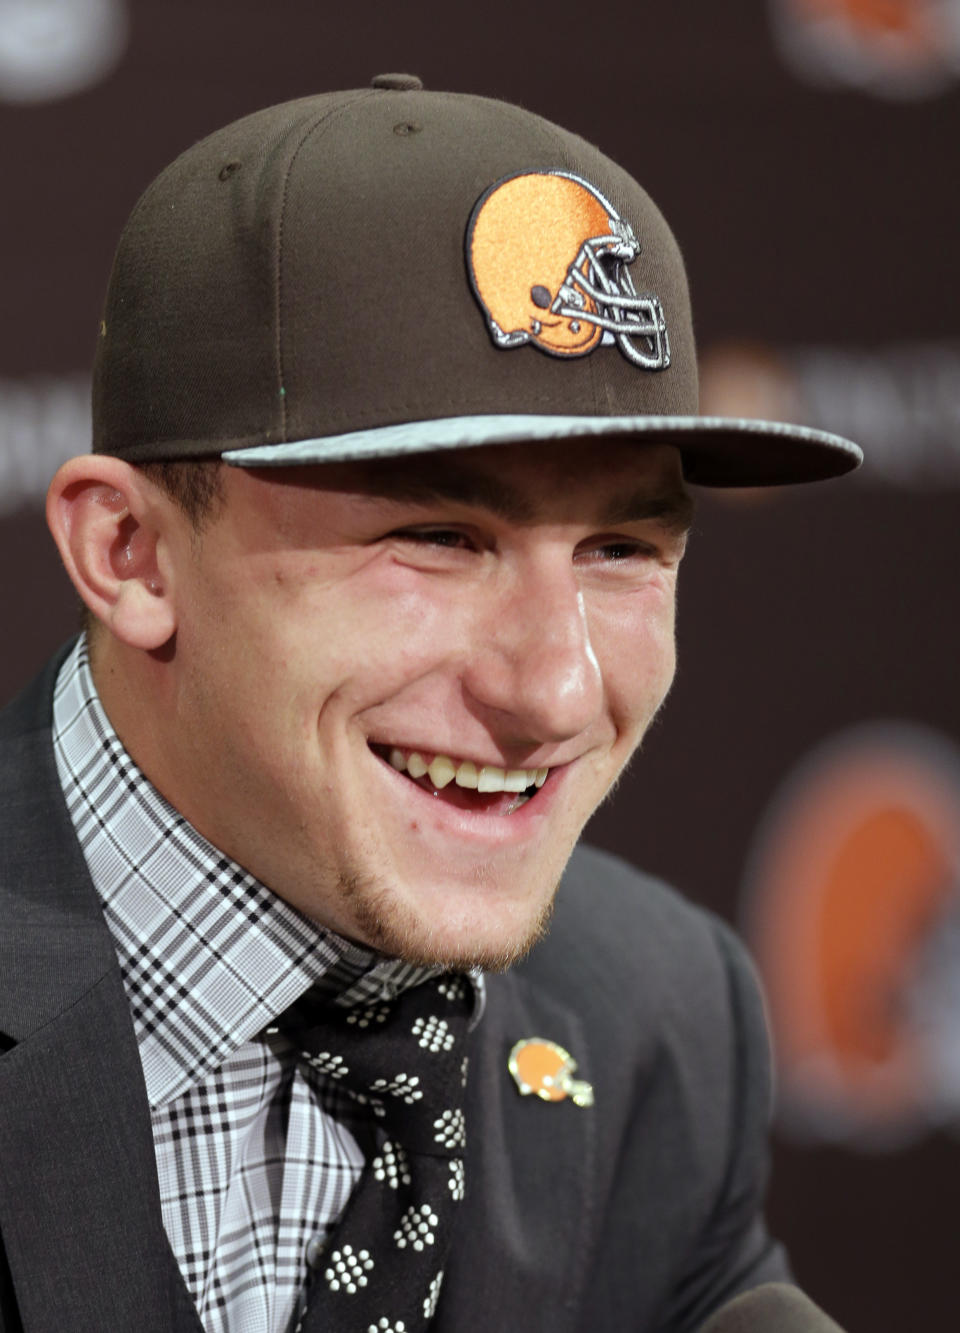 Cleveland Browns quarterback Johnny Manziel, from Texas A&M, laughs during his introductory news conference at the NFL football team's facility in Berea, Ohio Friday, May 9, 2014. The Browns selected Manziel with the 22nd overall pick in Thursday's draft. (AP Photo/Tony Dejak)